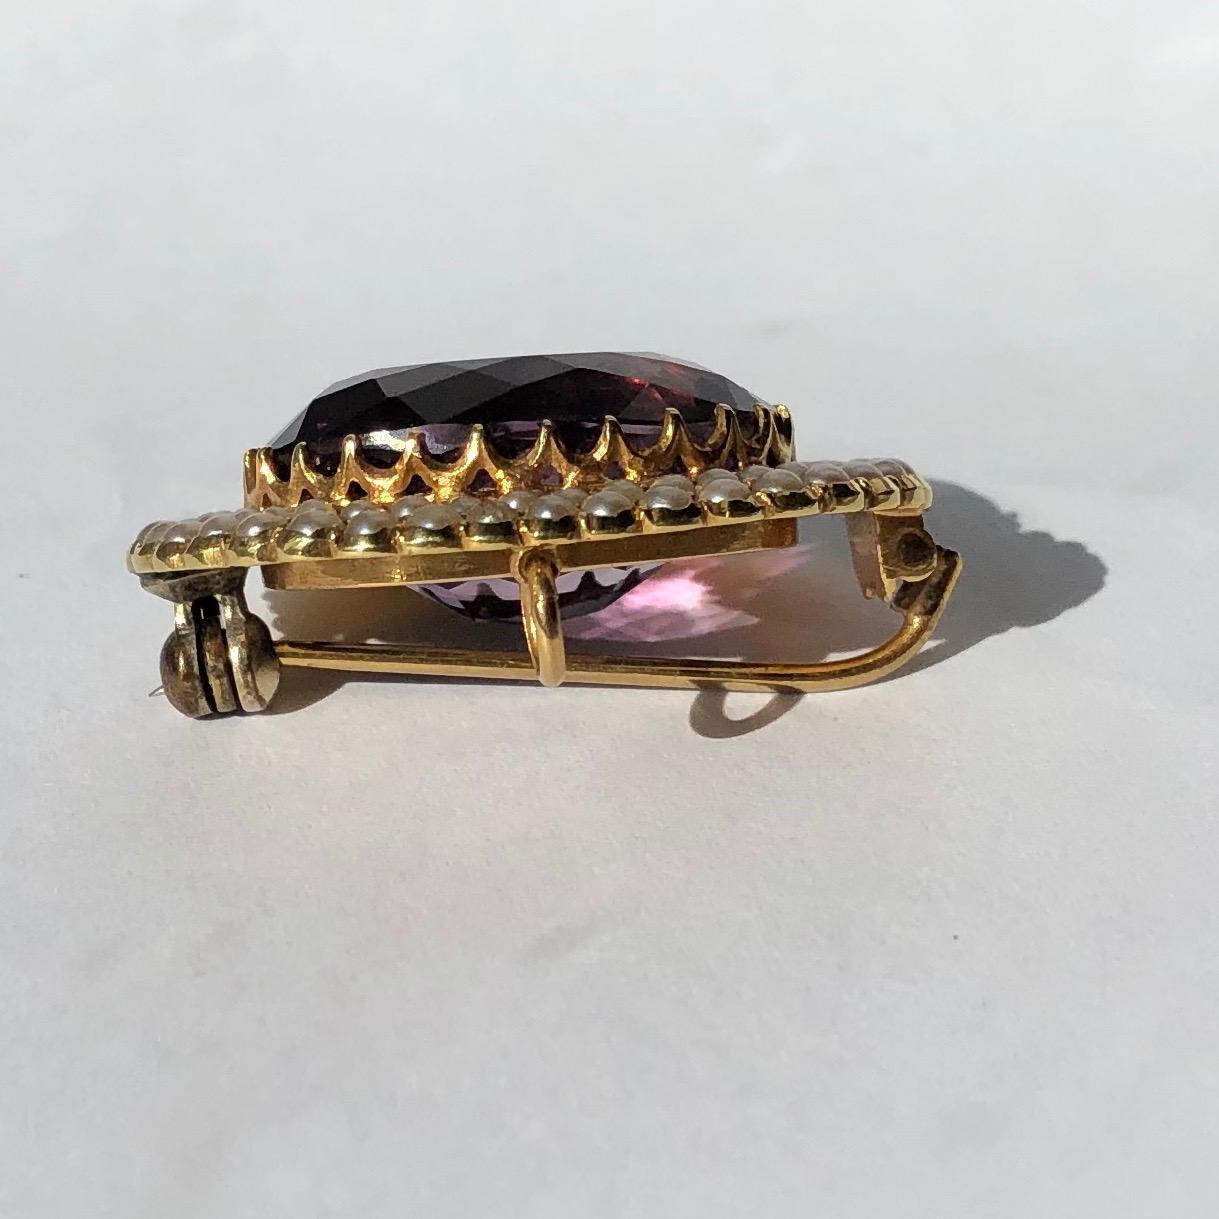 This stunning brooch holds a large amethyst stone which is a gorgeous pale purple colour and is complimented perfectly by the double row of pearls surrounding it. On the back there is the brooch pin and also a hoop so this could be worn as a brooch